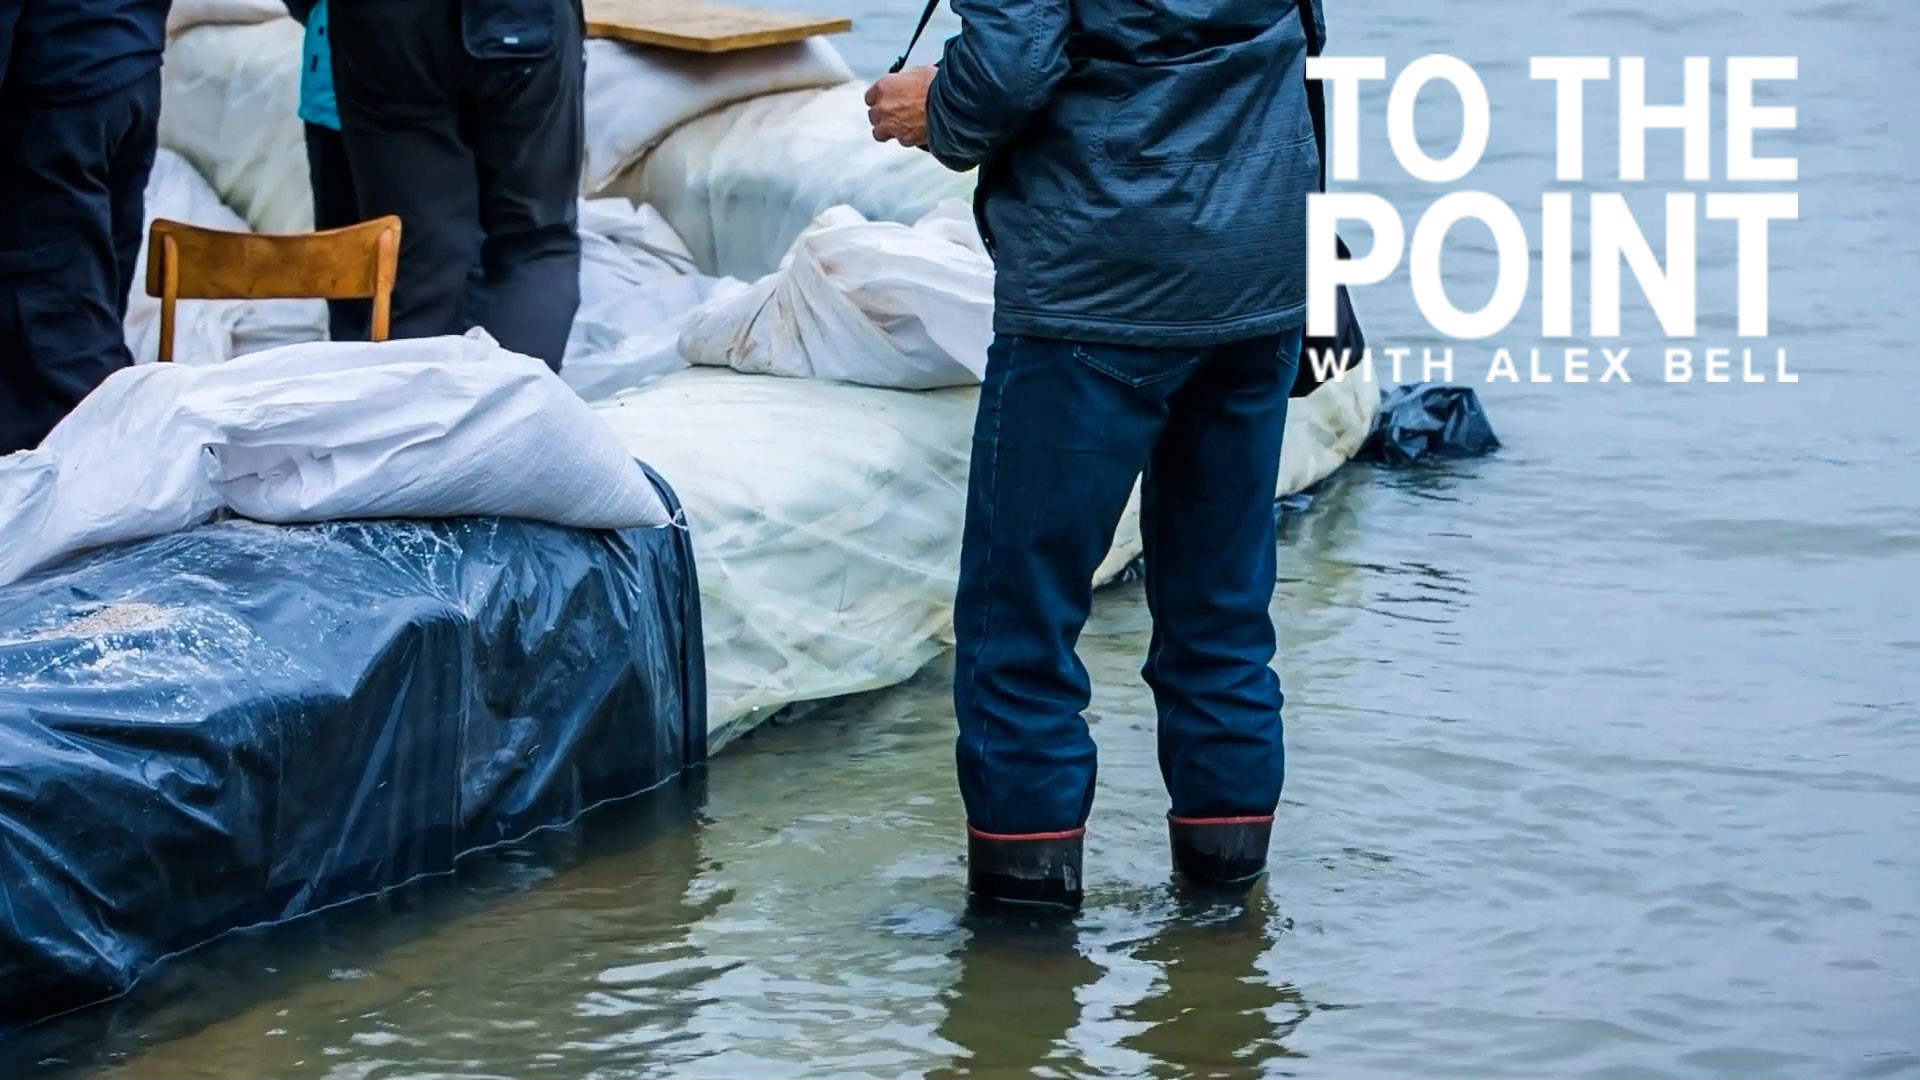 Flood preps: How to prepare your home and your family for flooding | To The Point